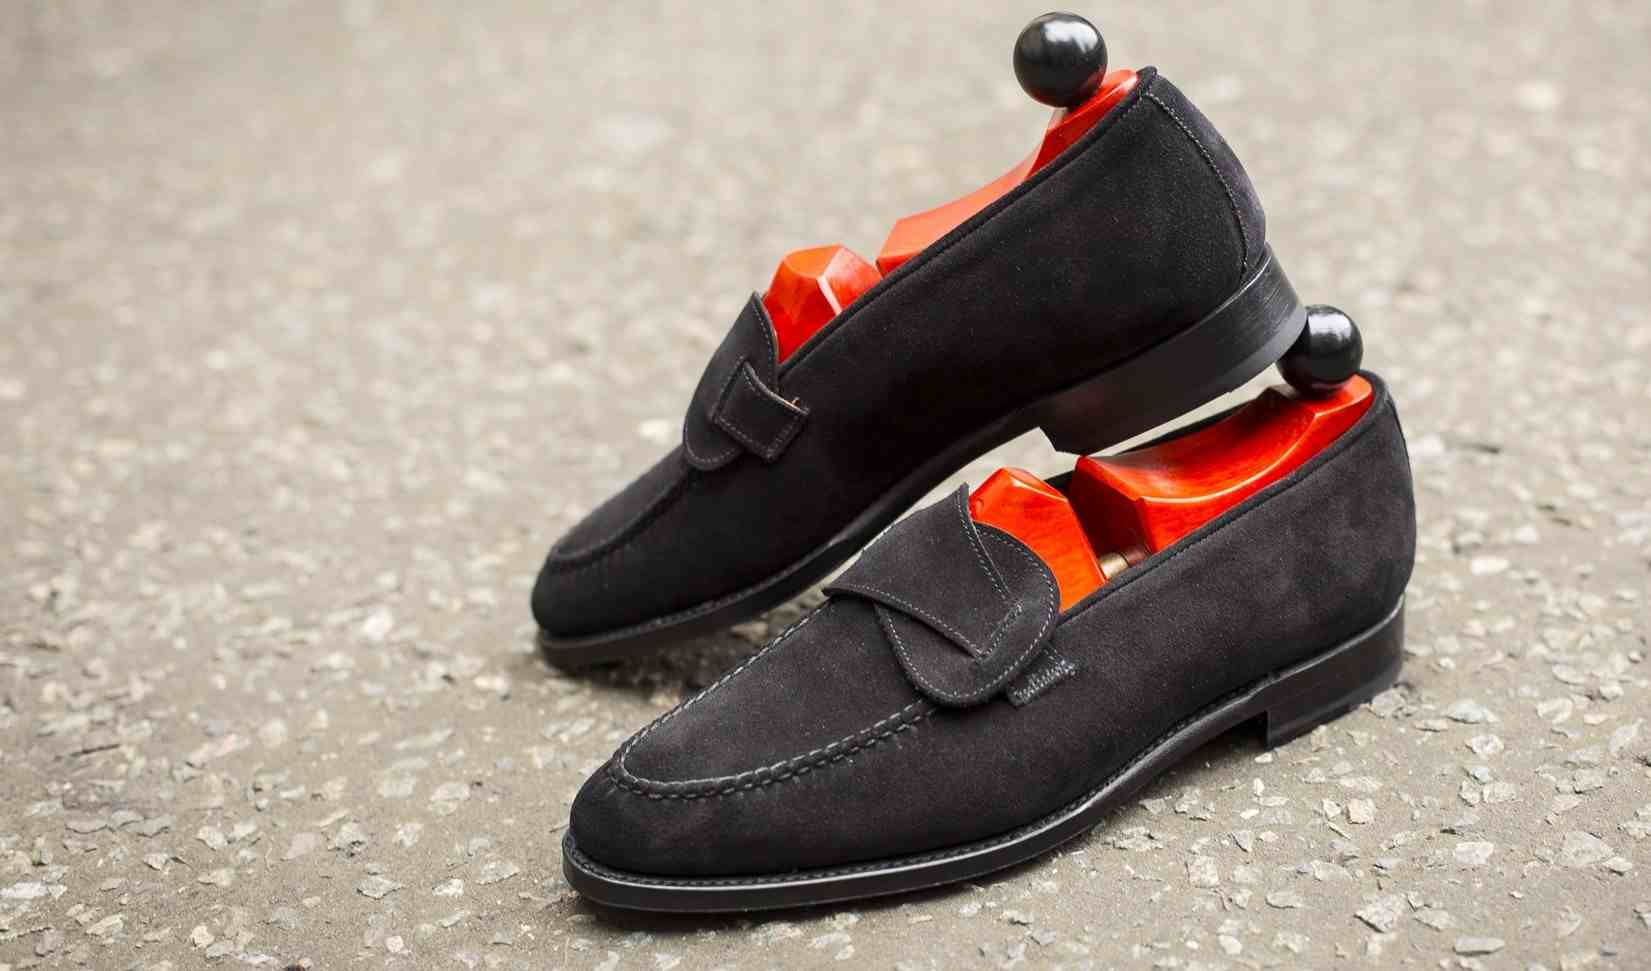  Buy Black Suede Leather Shoes + best price 